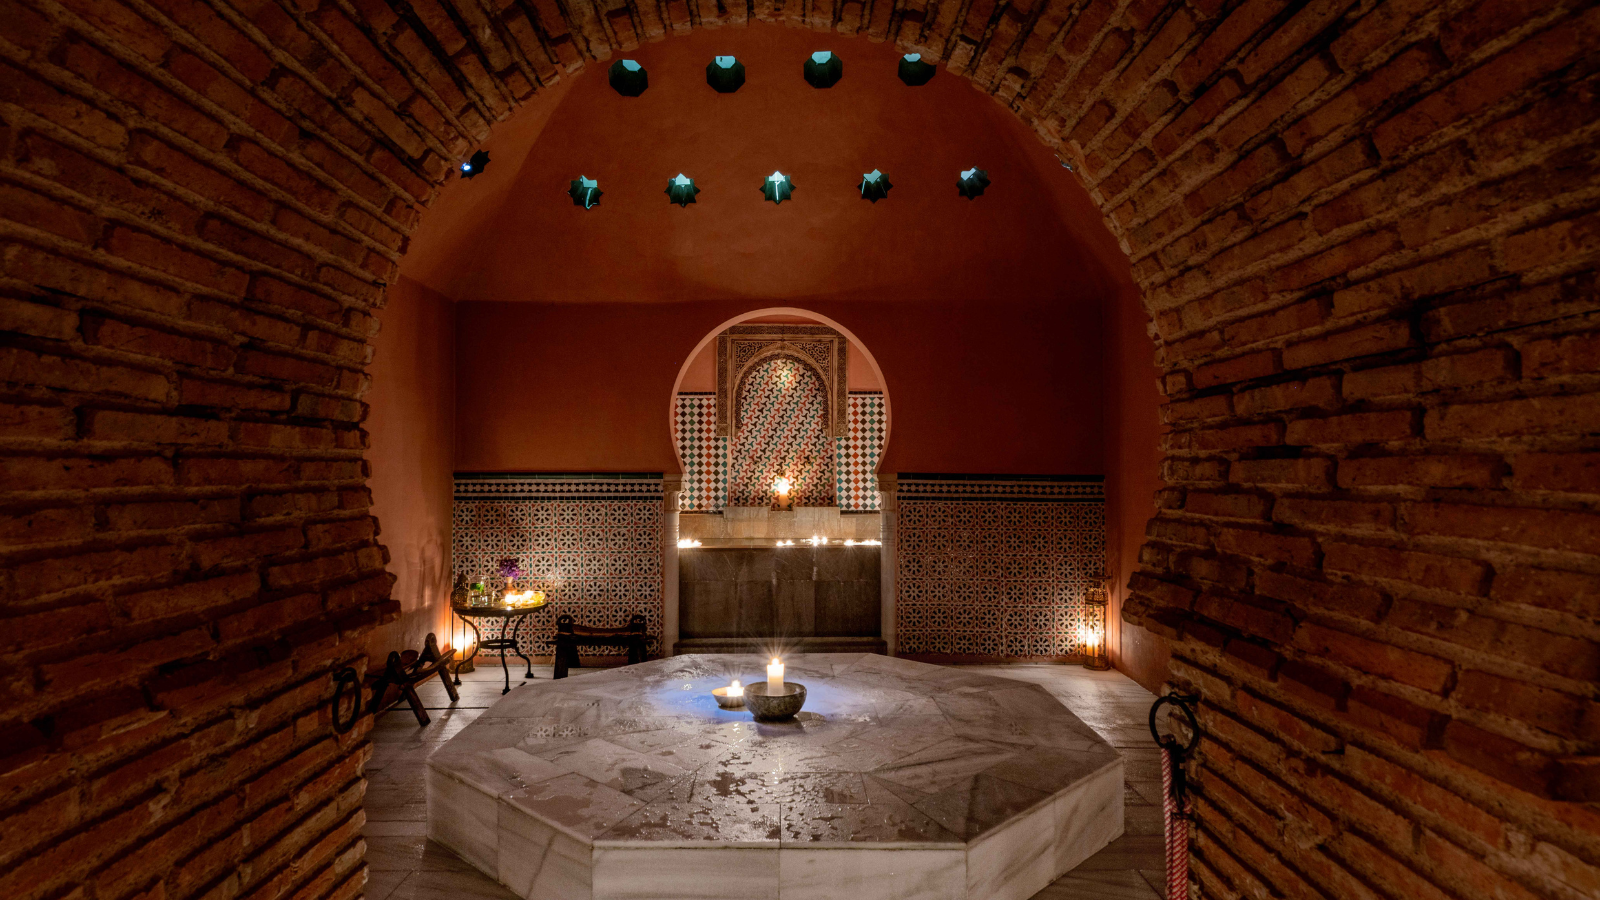 TURKISH BATHS - ARCHITECTURE AND INFLUENCE